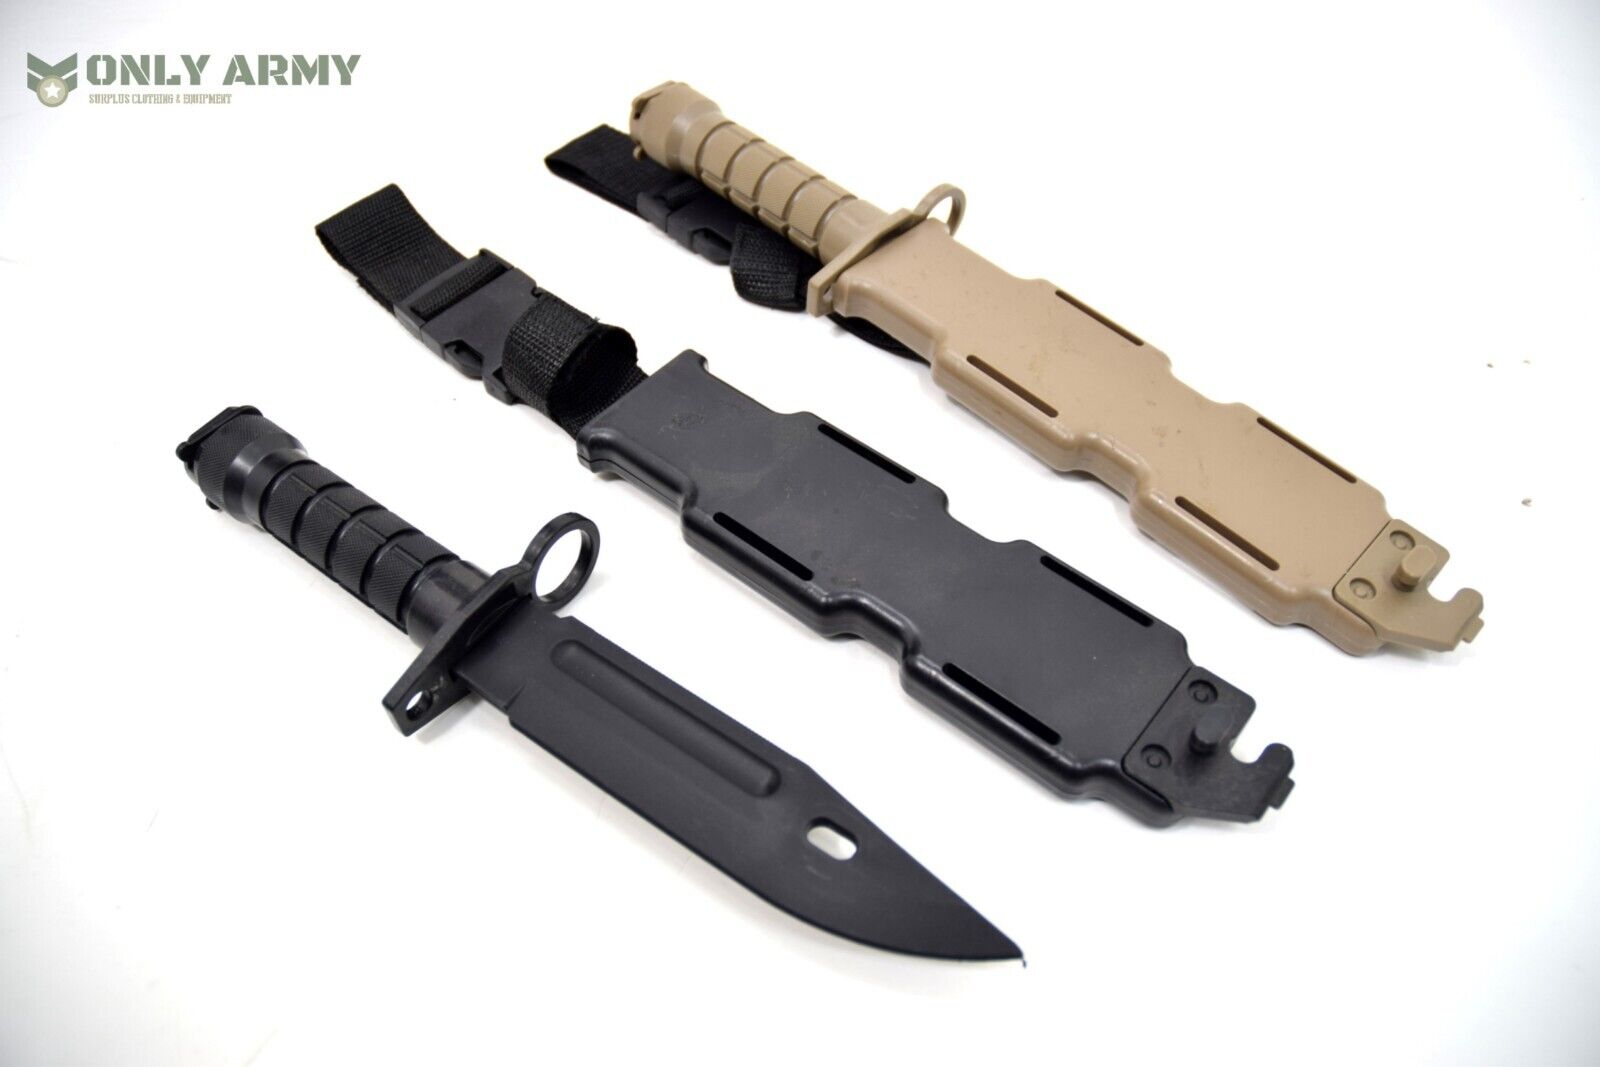 Rubber Dummy Training Knife Bayonet Training Aid Airsoft Safety Martial Arts